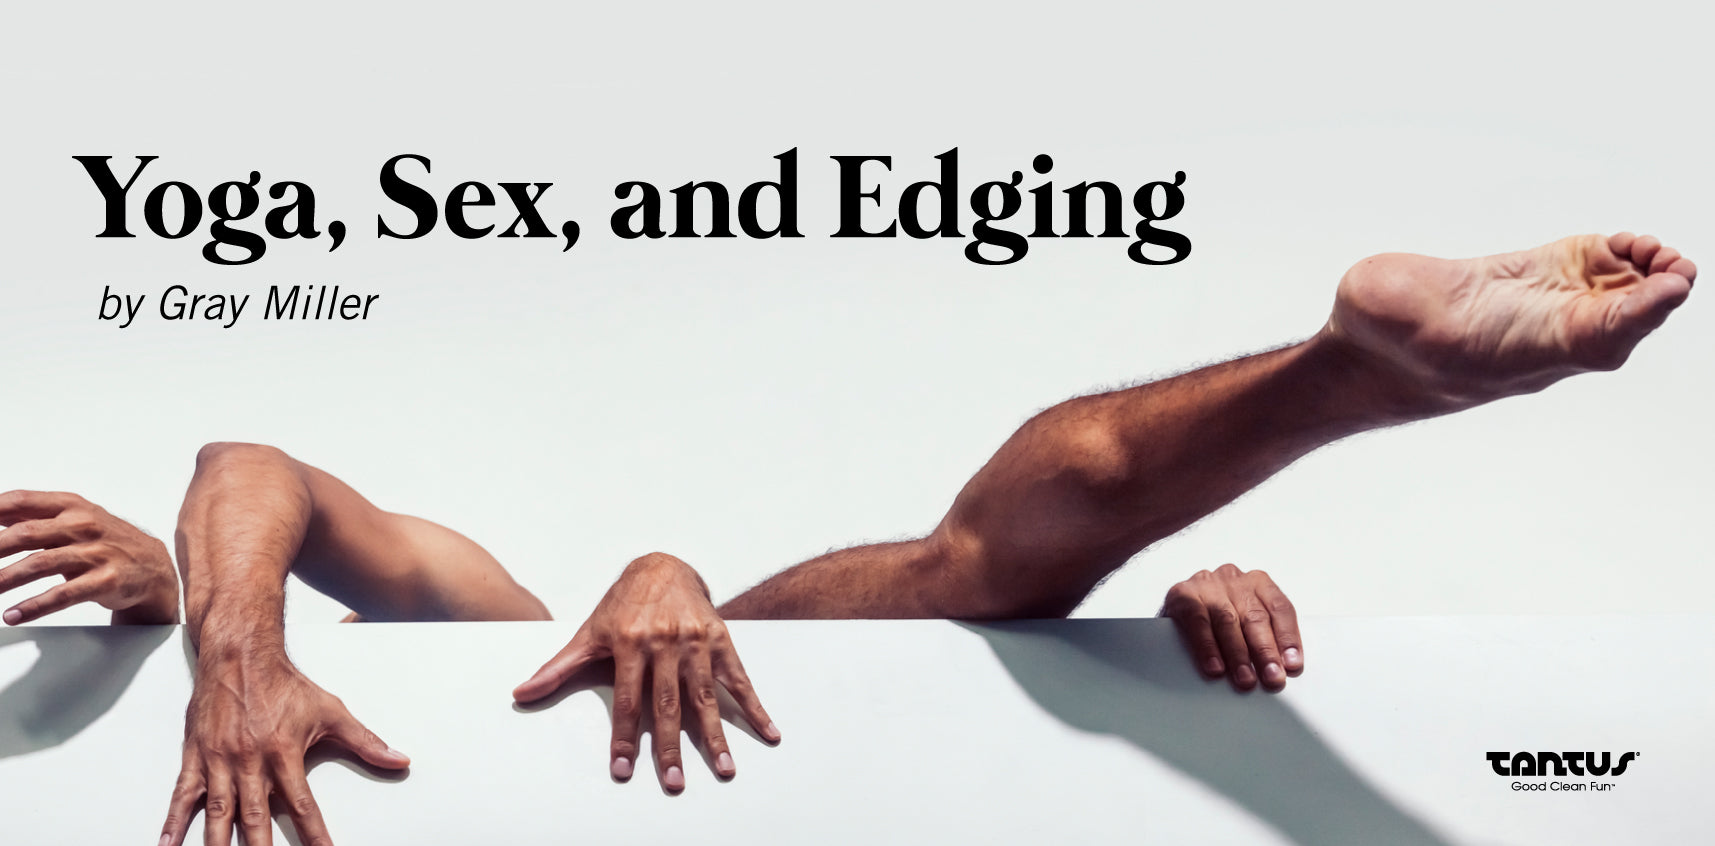 Yoga, Sex and Edging